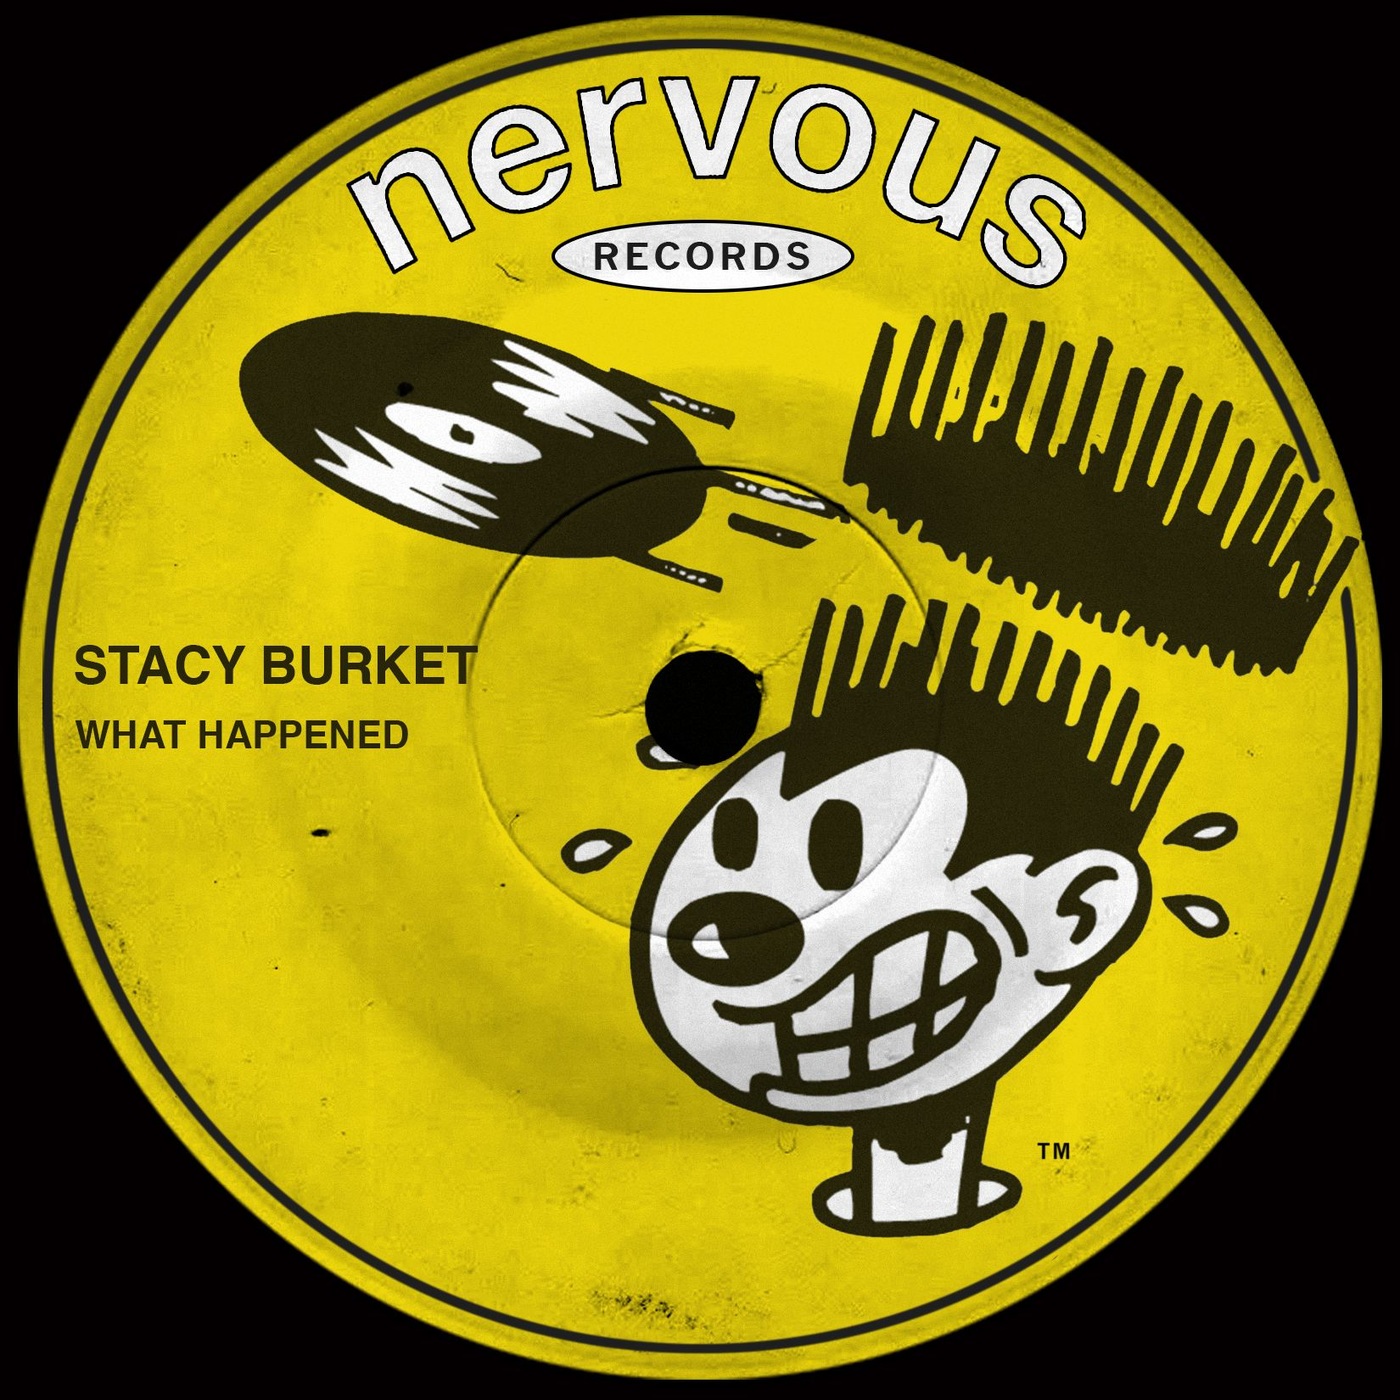 Stacy Burket - What Happened / Nervous Records